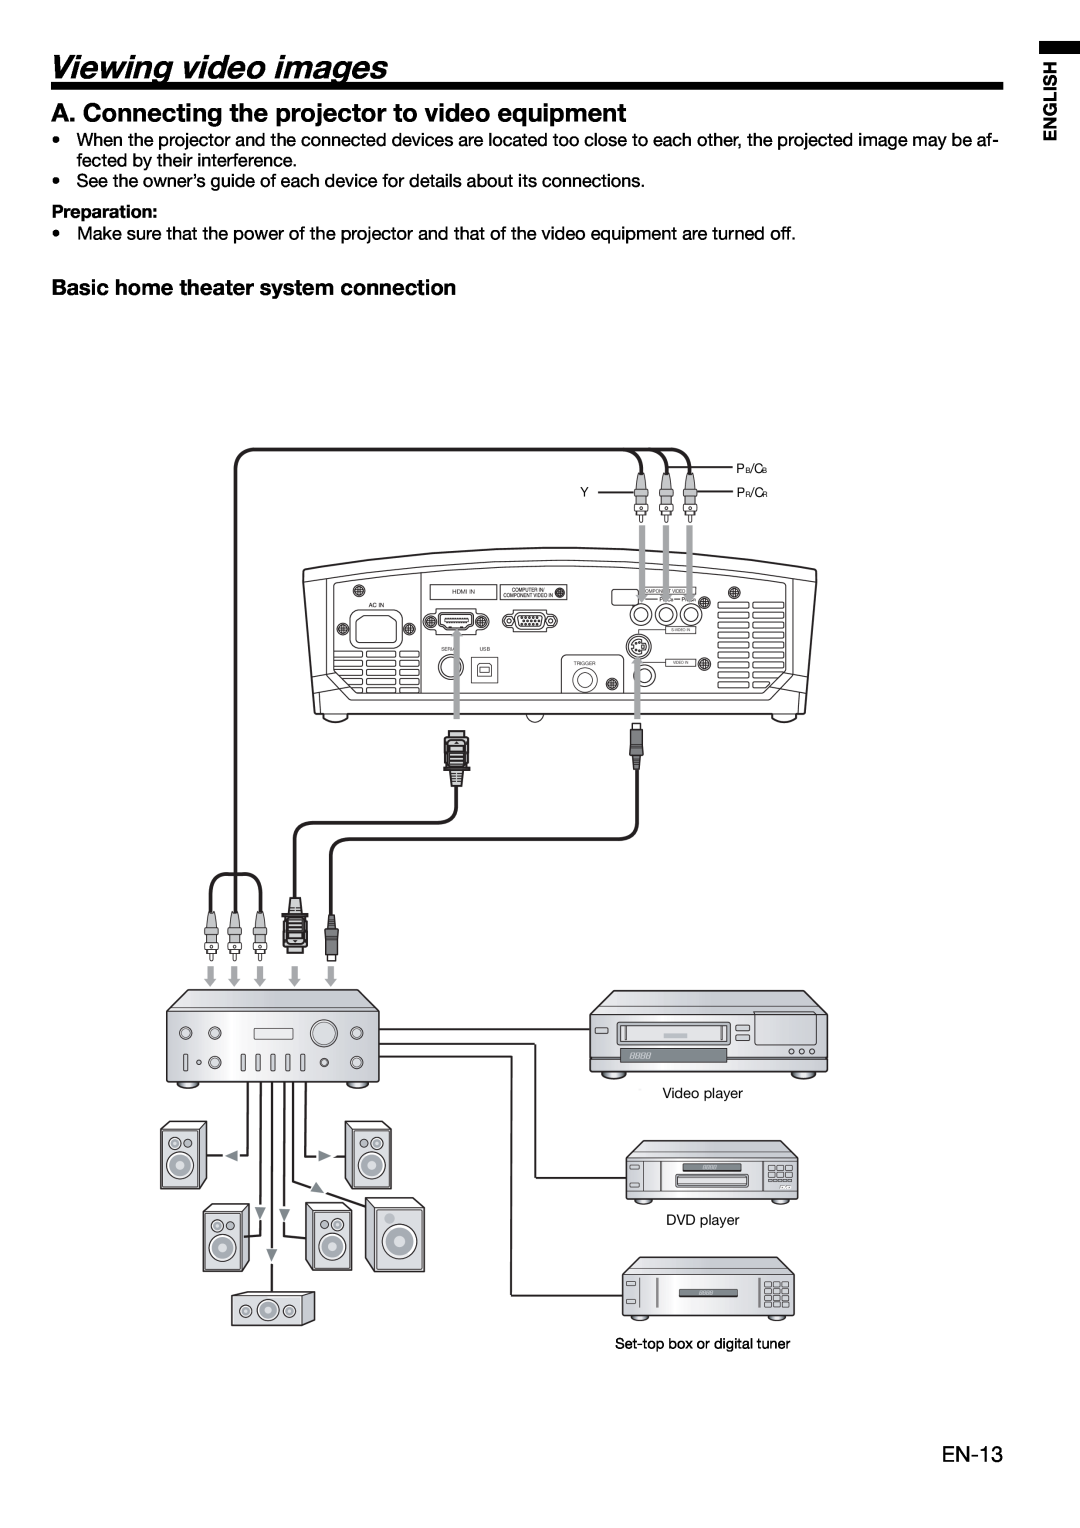 Mitsubishi HC1100 user manual Viewing video images, A. Connecting the projector to video equipment, Preparation, English 